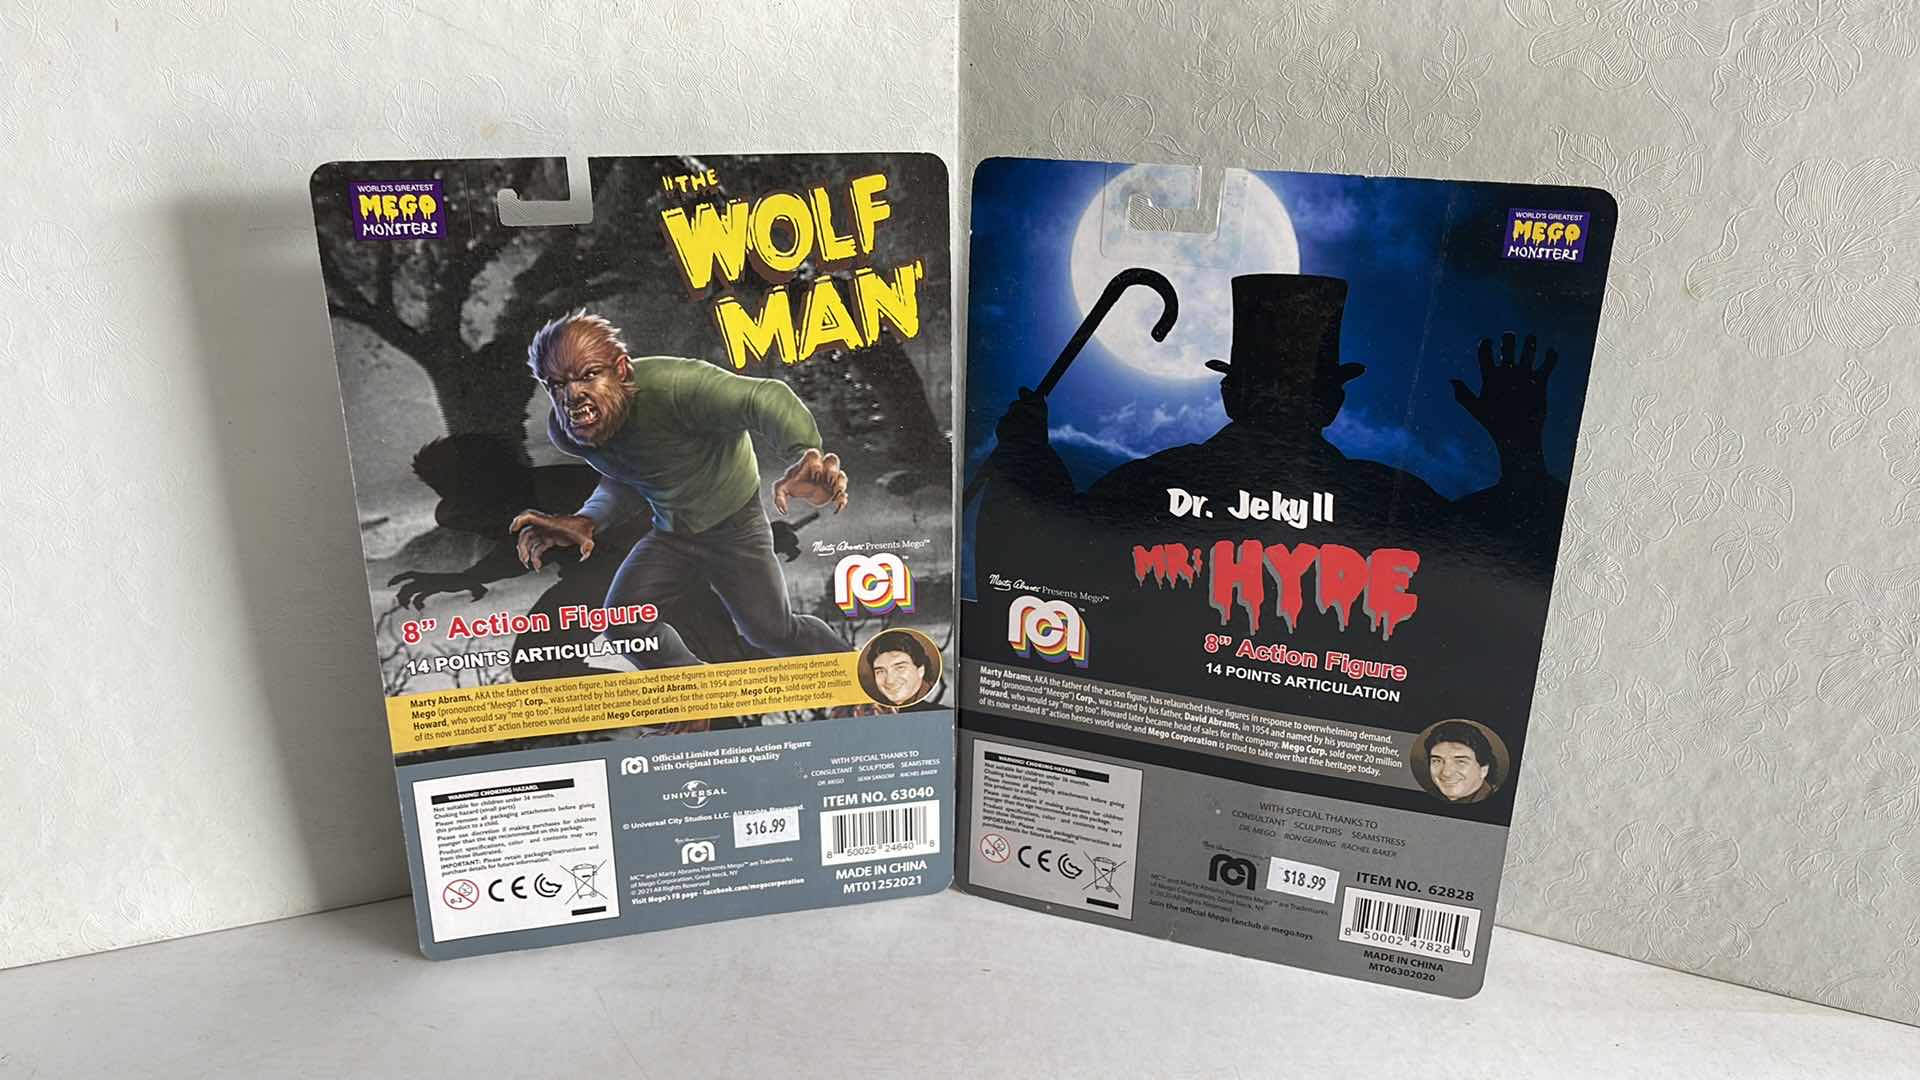 Photo 2 of NIB MEGO MONSTERS DR JEKYLL MR HYDE & WOLF MAN MSRP $18.99 EACH